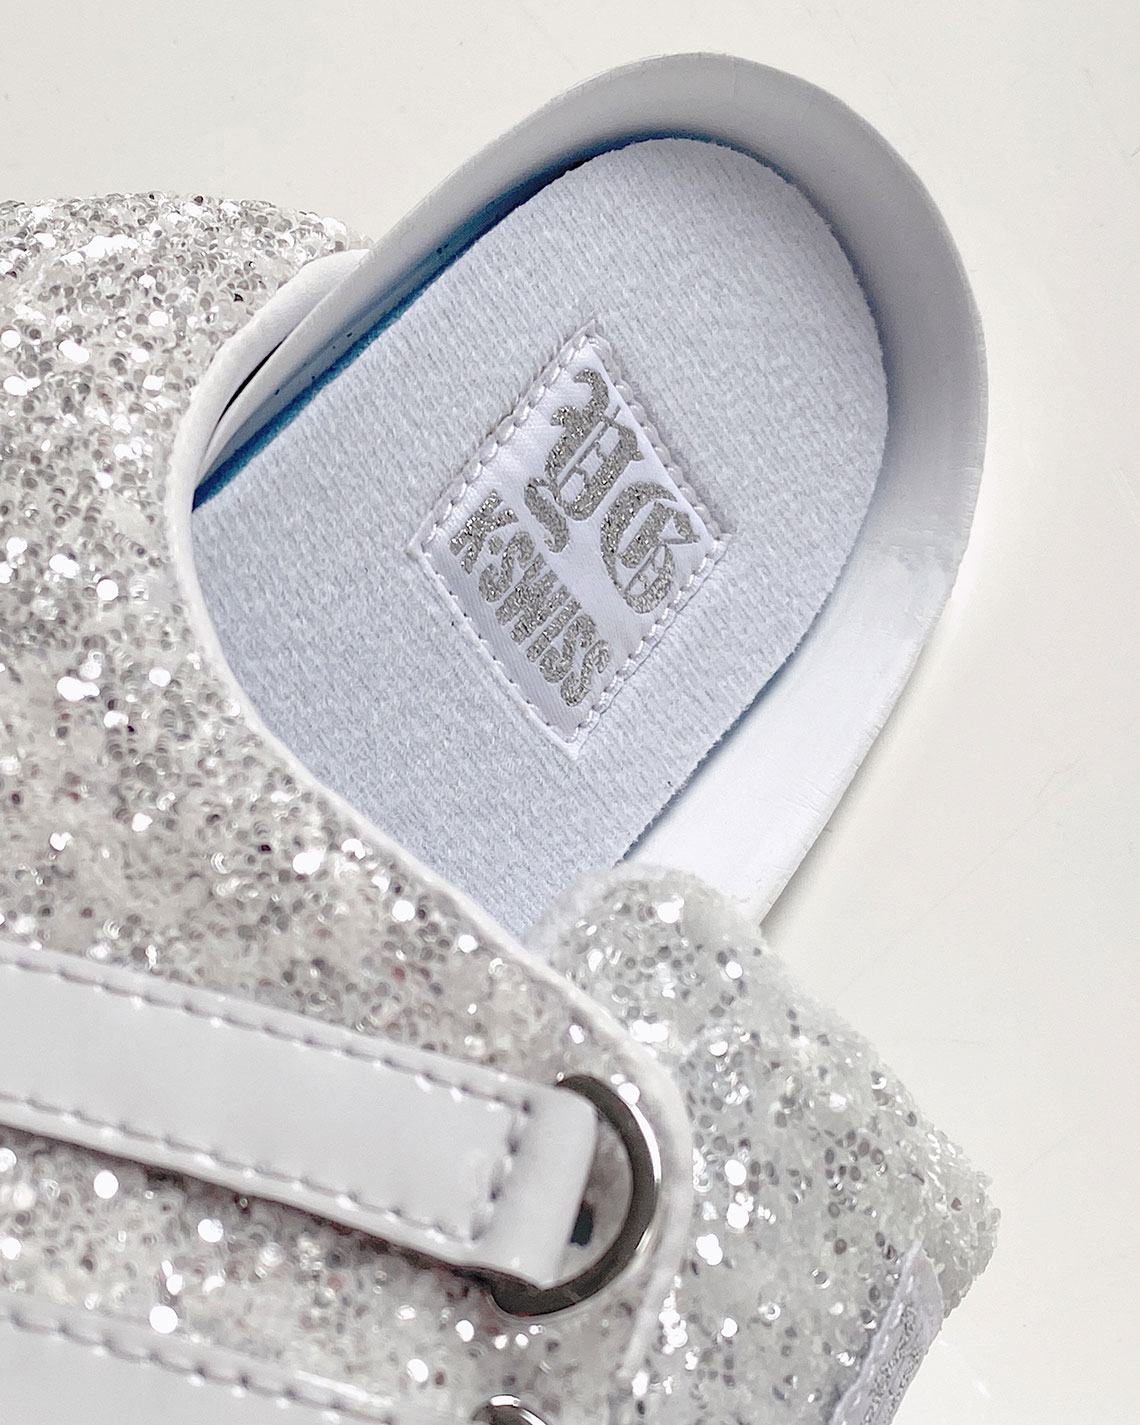 Yg And K Swiss Team Up For The Glitter Covered K Swiss Classic Lx Disco 5